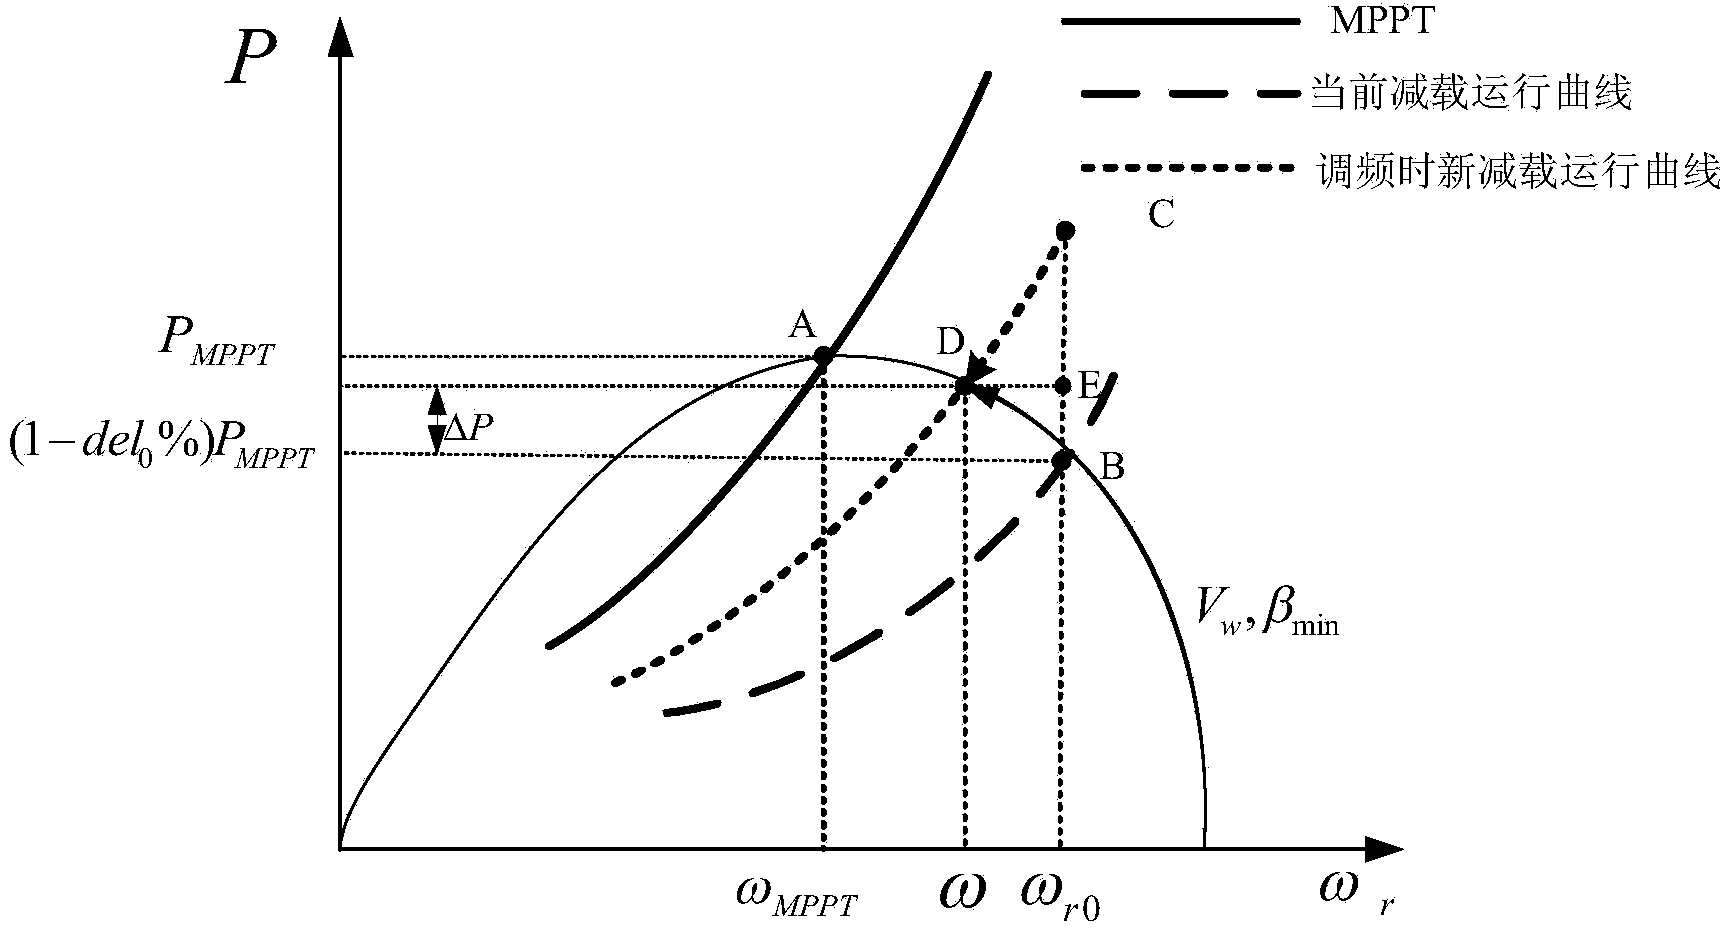 Full-wind-speed frequency response control method for doubly-fed wind generator